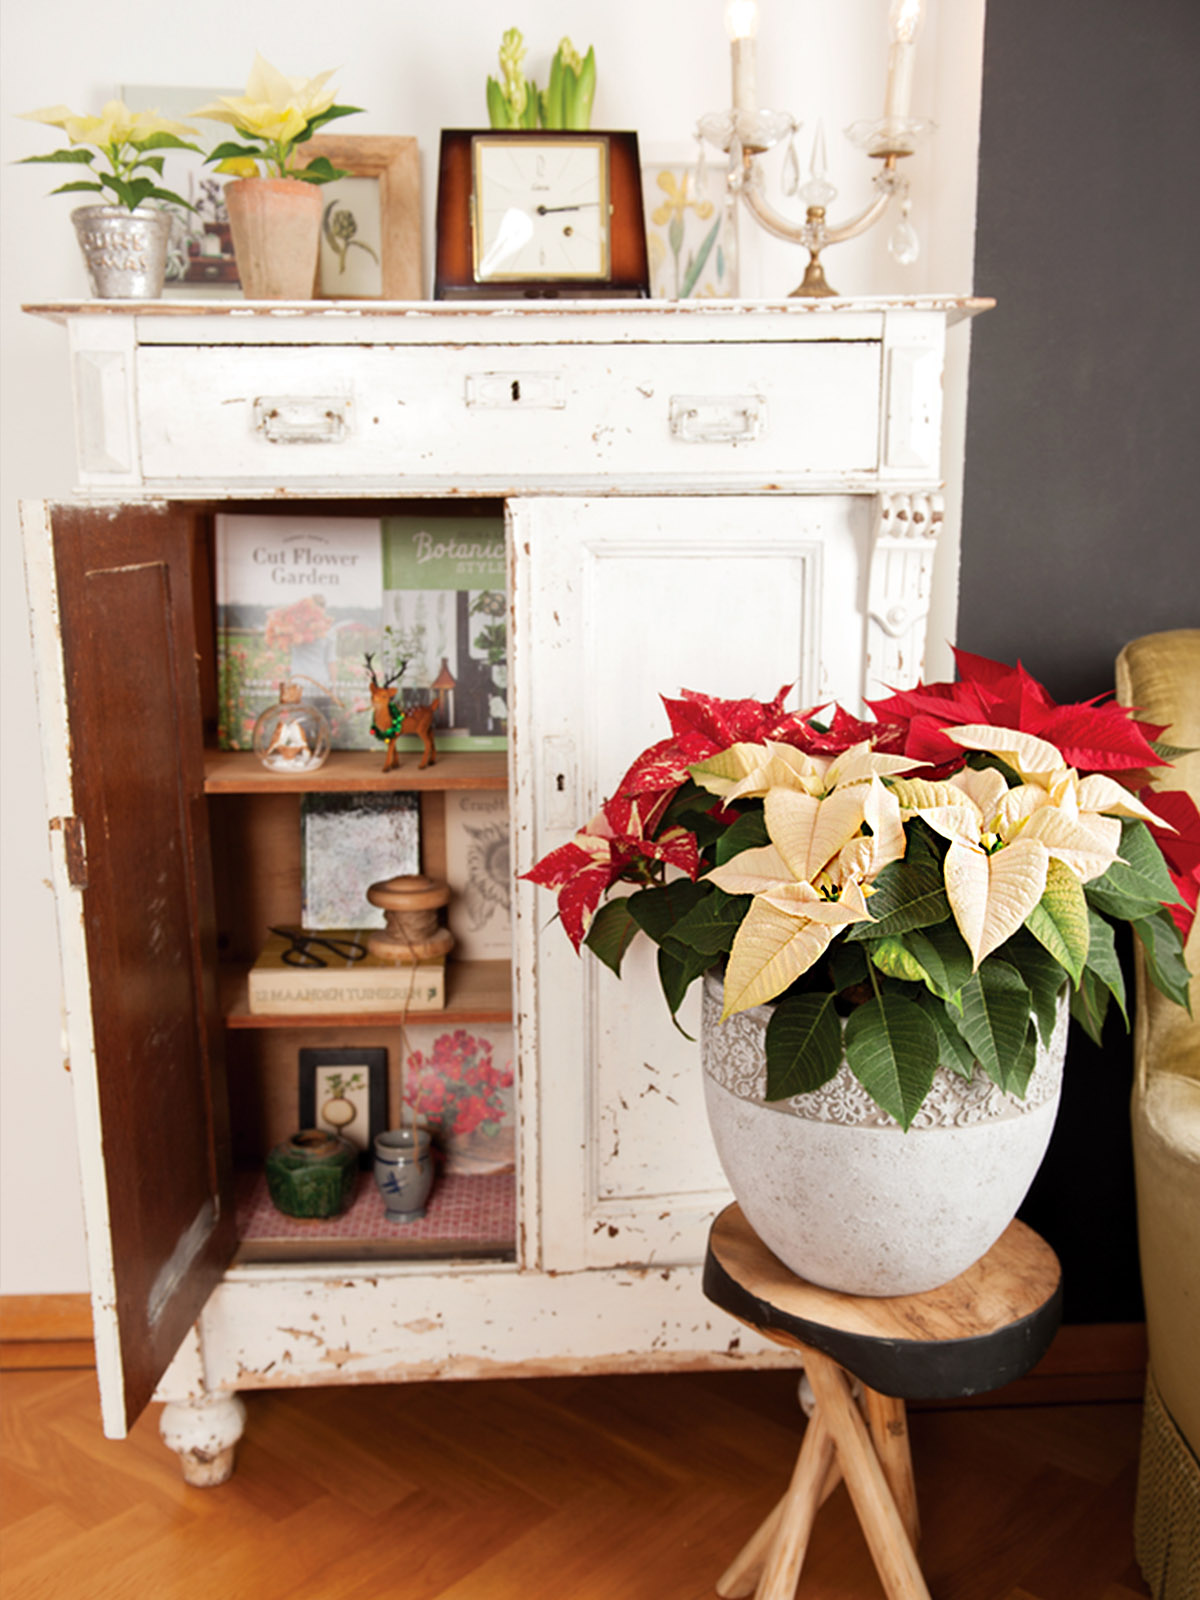 Poinsettia Mix and Match Red and White on Thursd